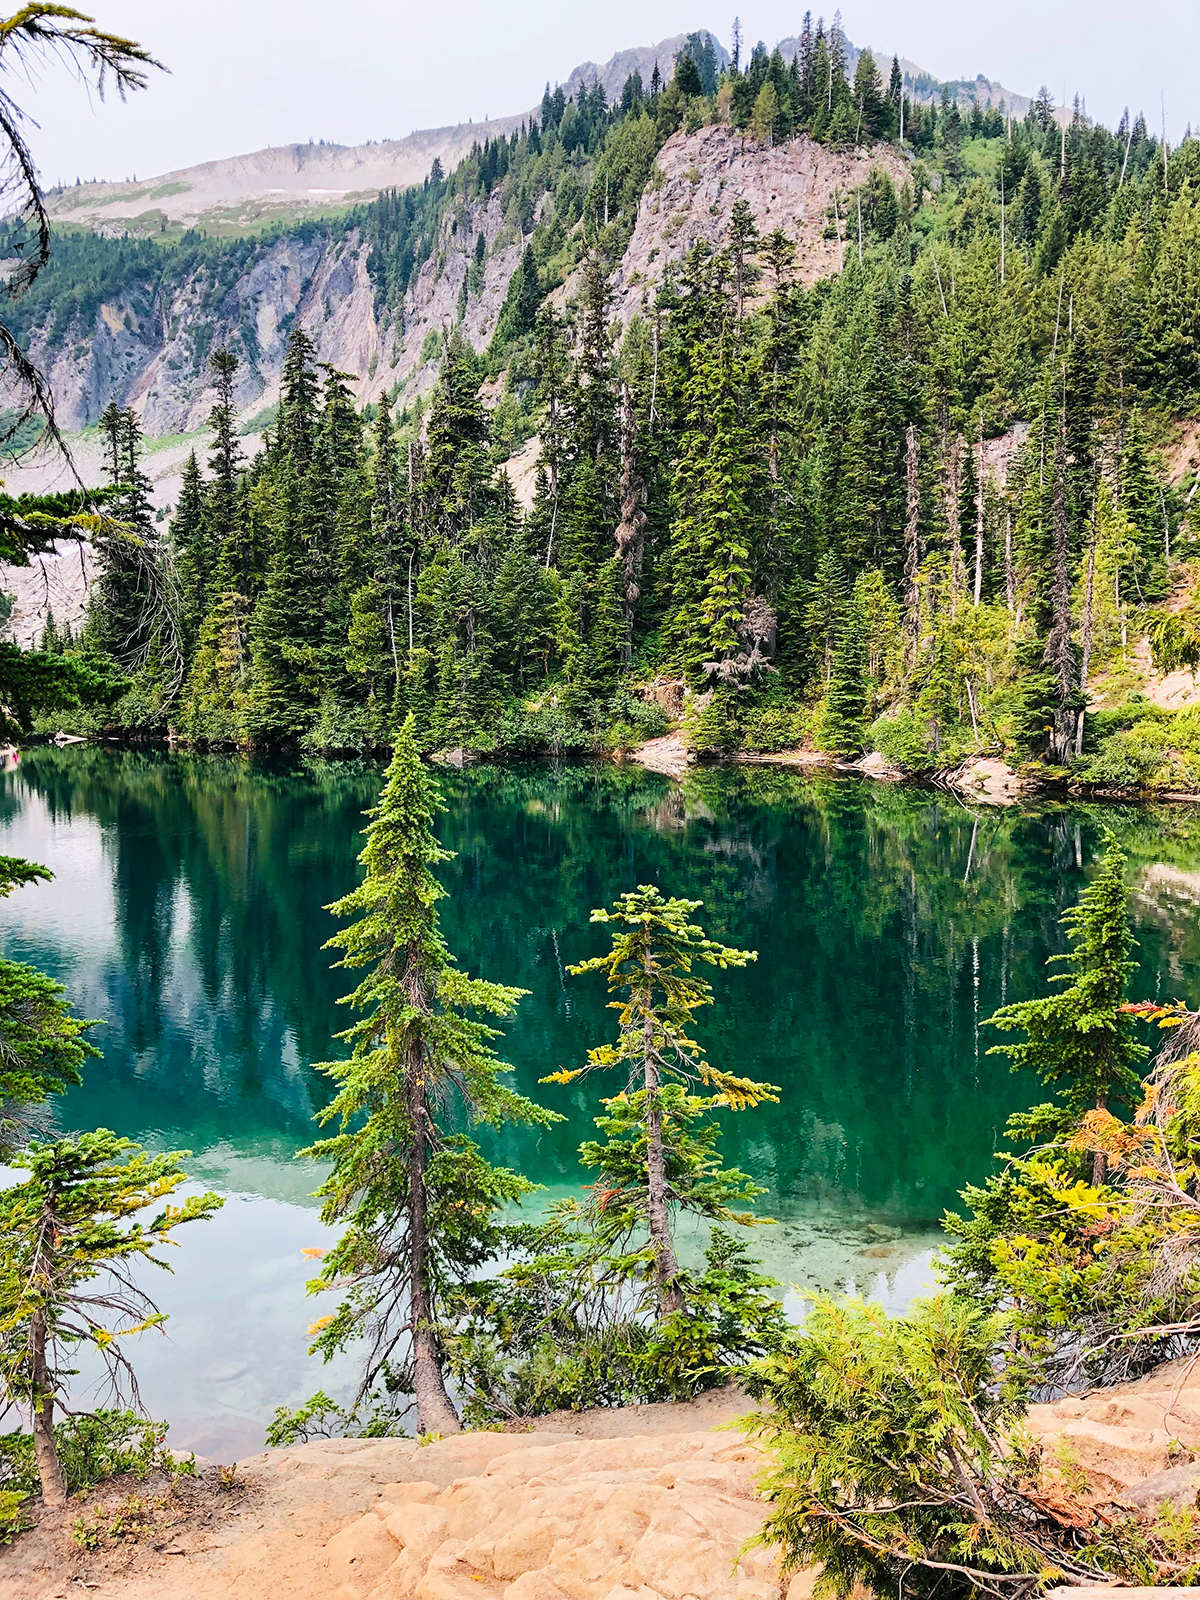 teal water lake with trees surrounding it